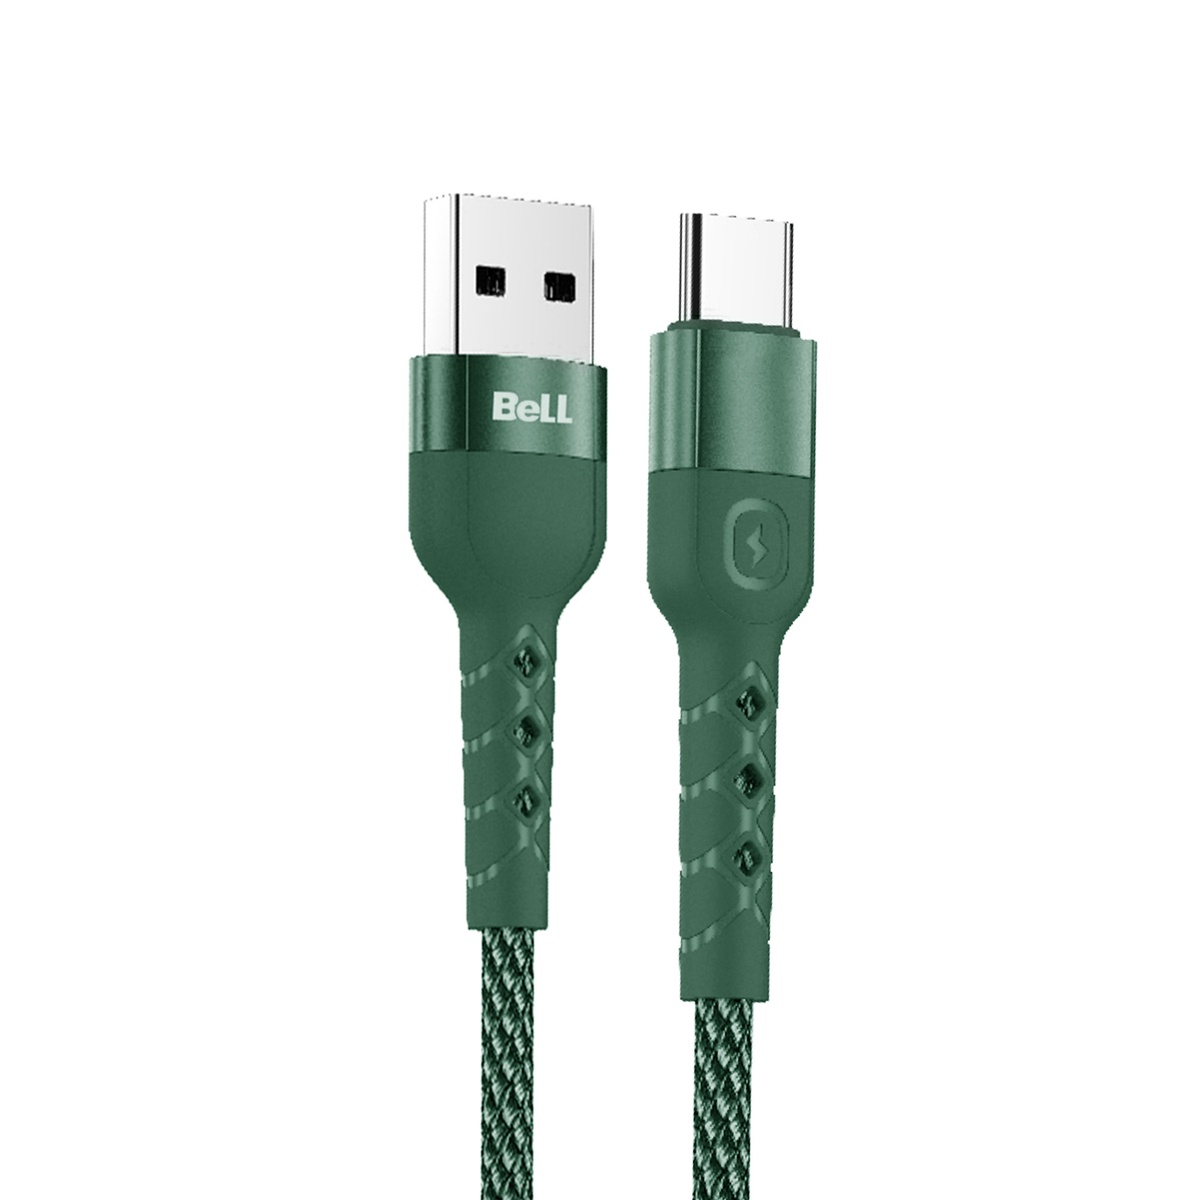 Effortless Charging & Data Transfer: BLCB 212 Type C Cable